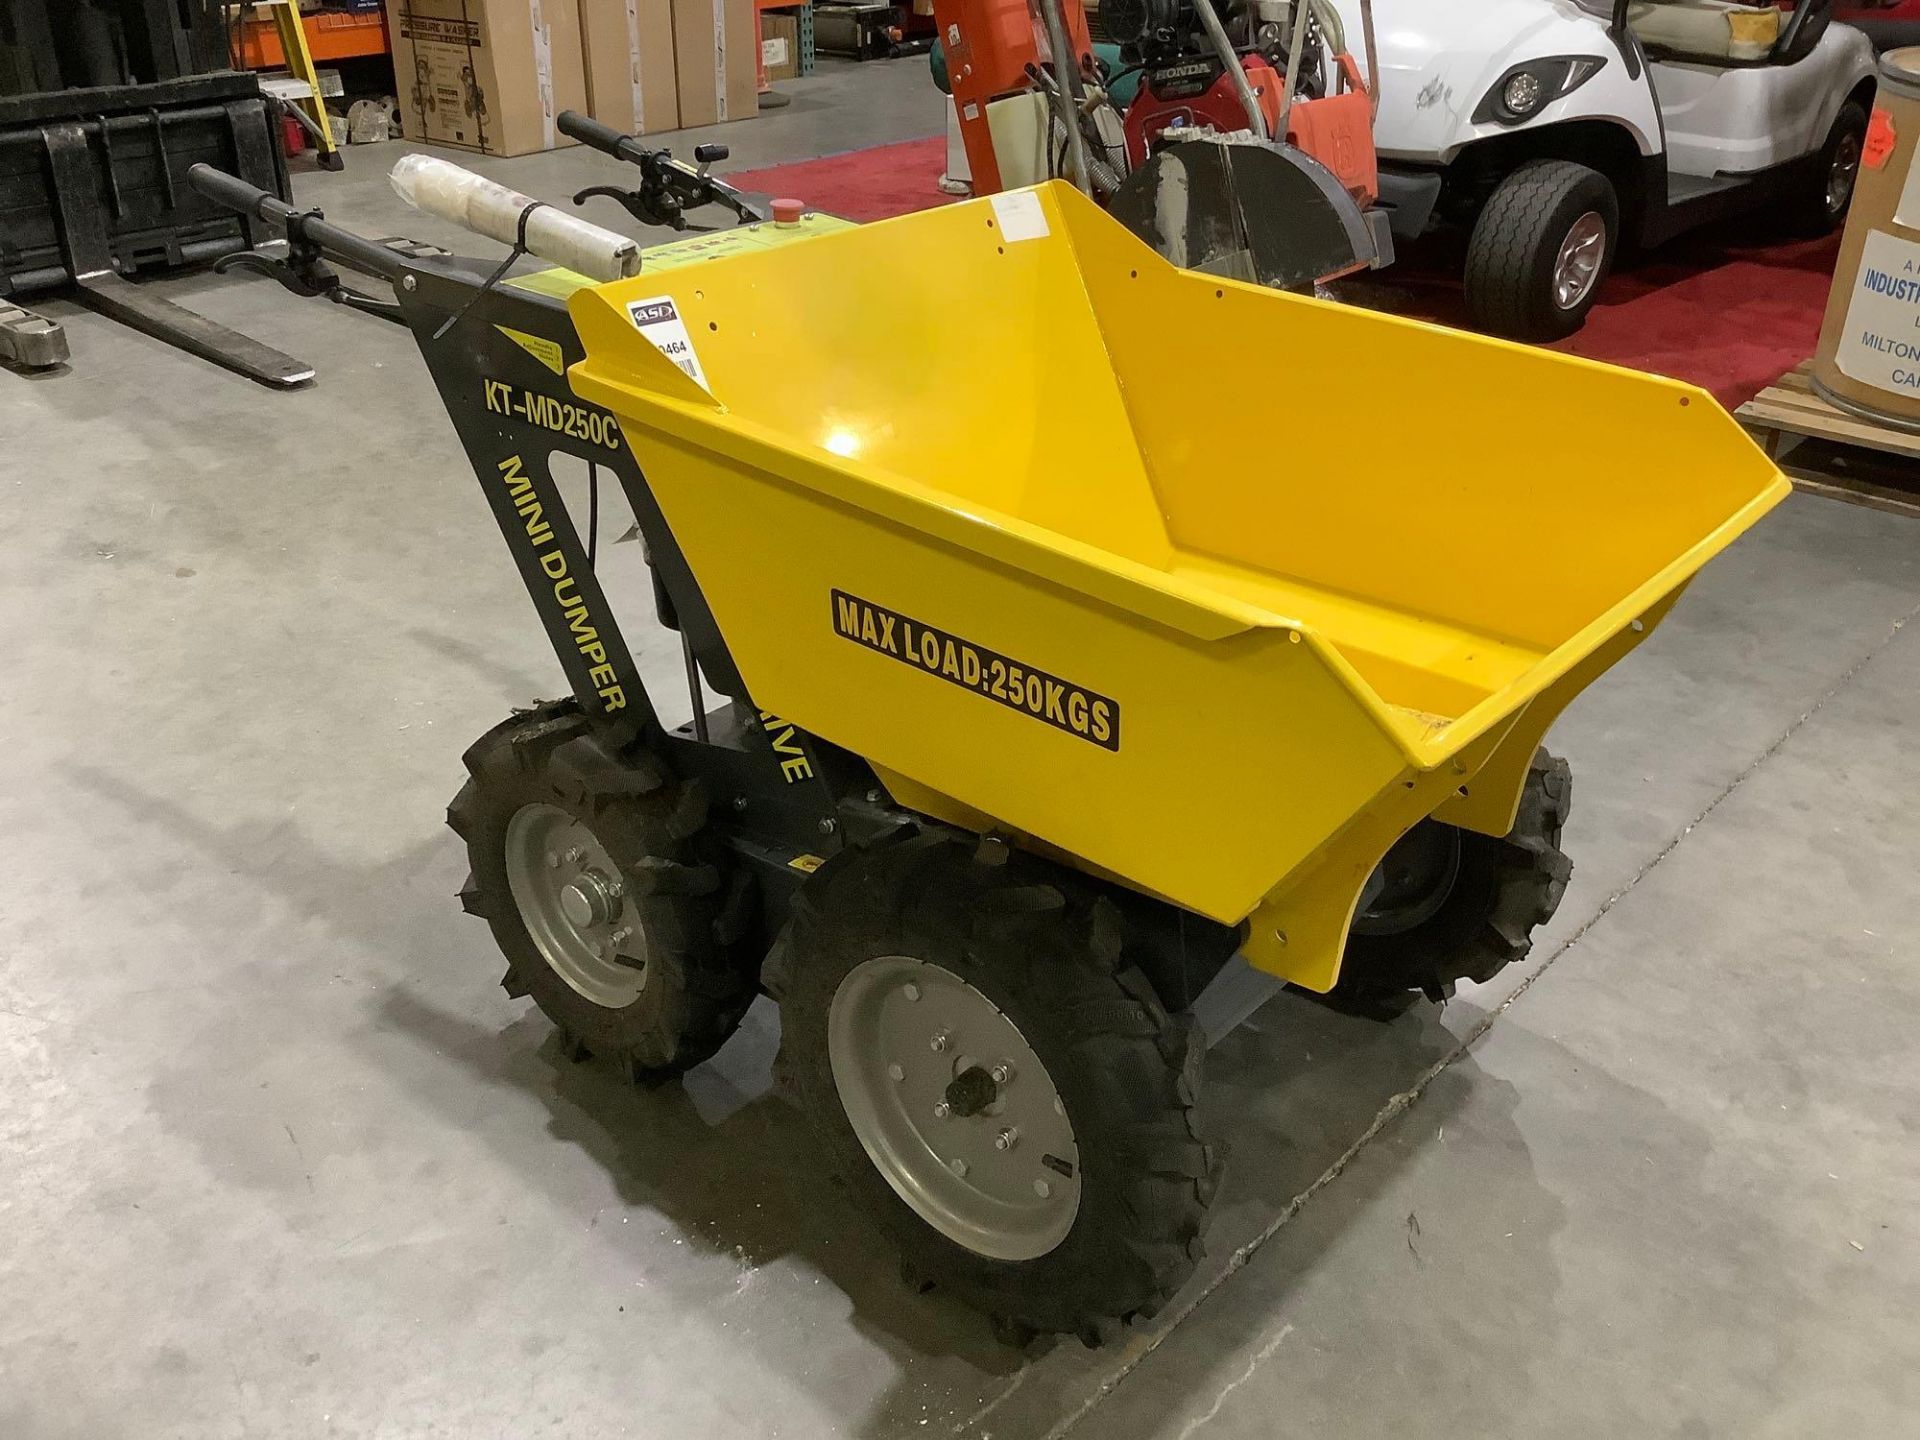 UNUSED 4WD CHAIN DRIVE MINI DUMPER MODEL KT-MD250C WITH LONCIN 196cc MOTOR, GAS POWERED, APPROX ENGI